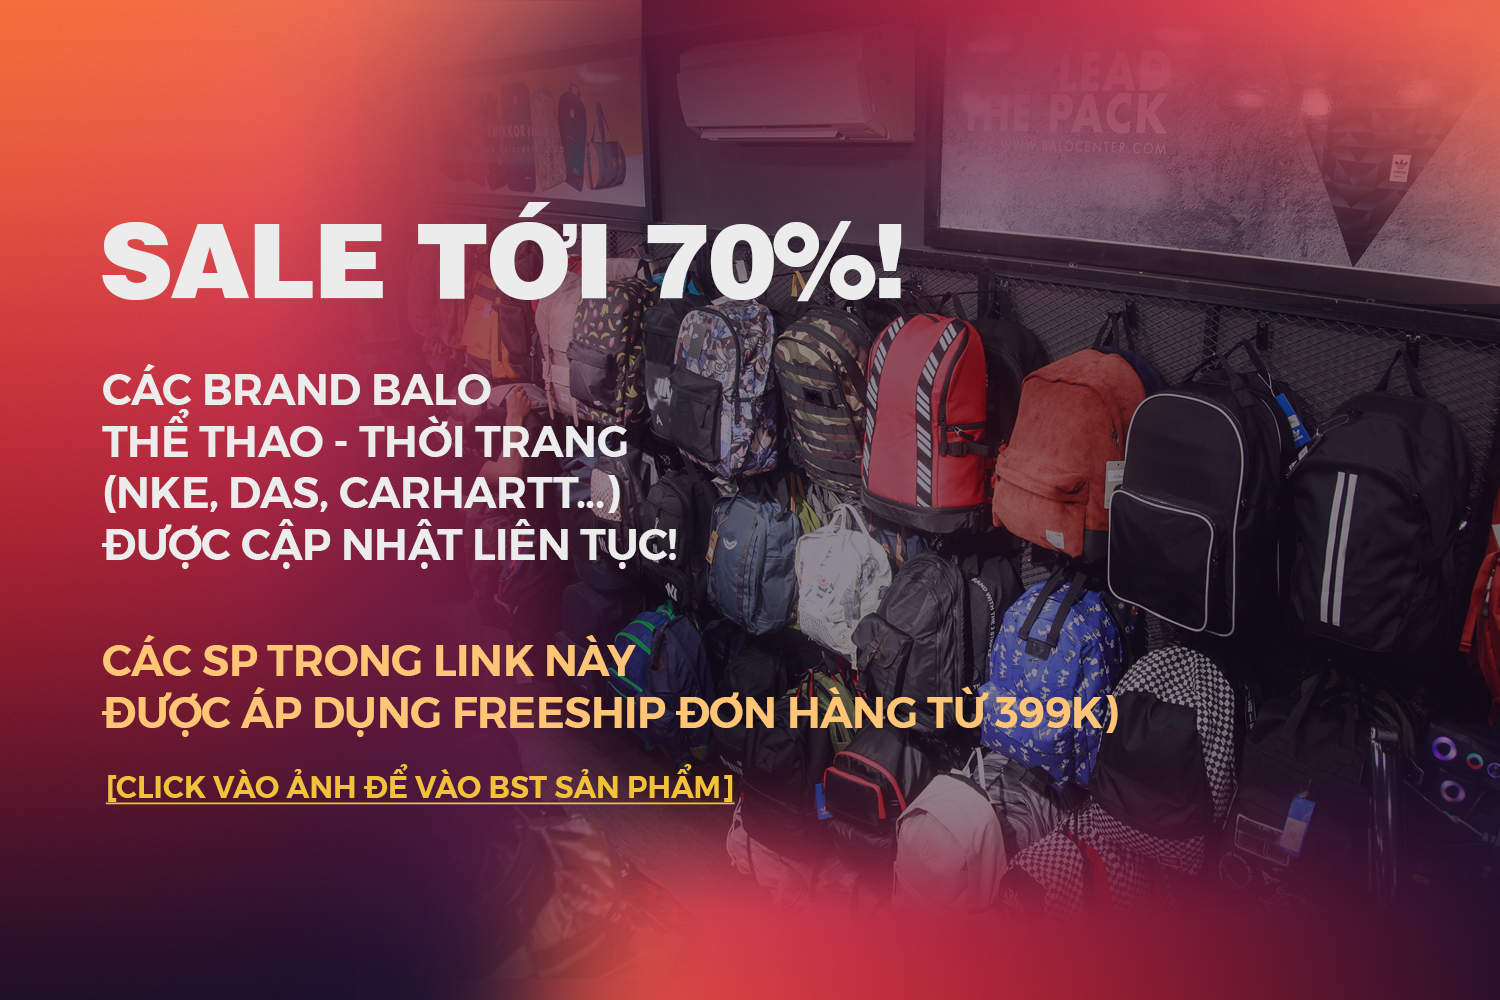 SALE UP TO 70% OFF SALE BACKTOSKOOL BALOCENTER